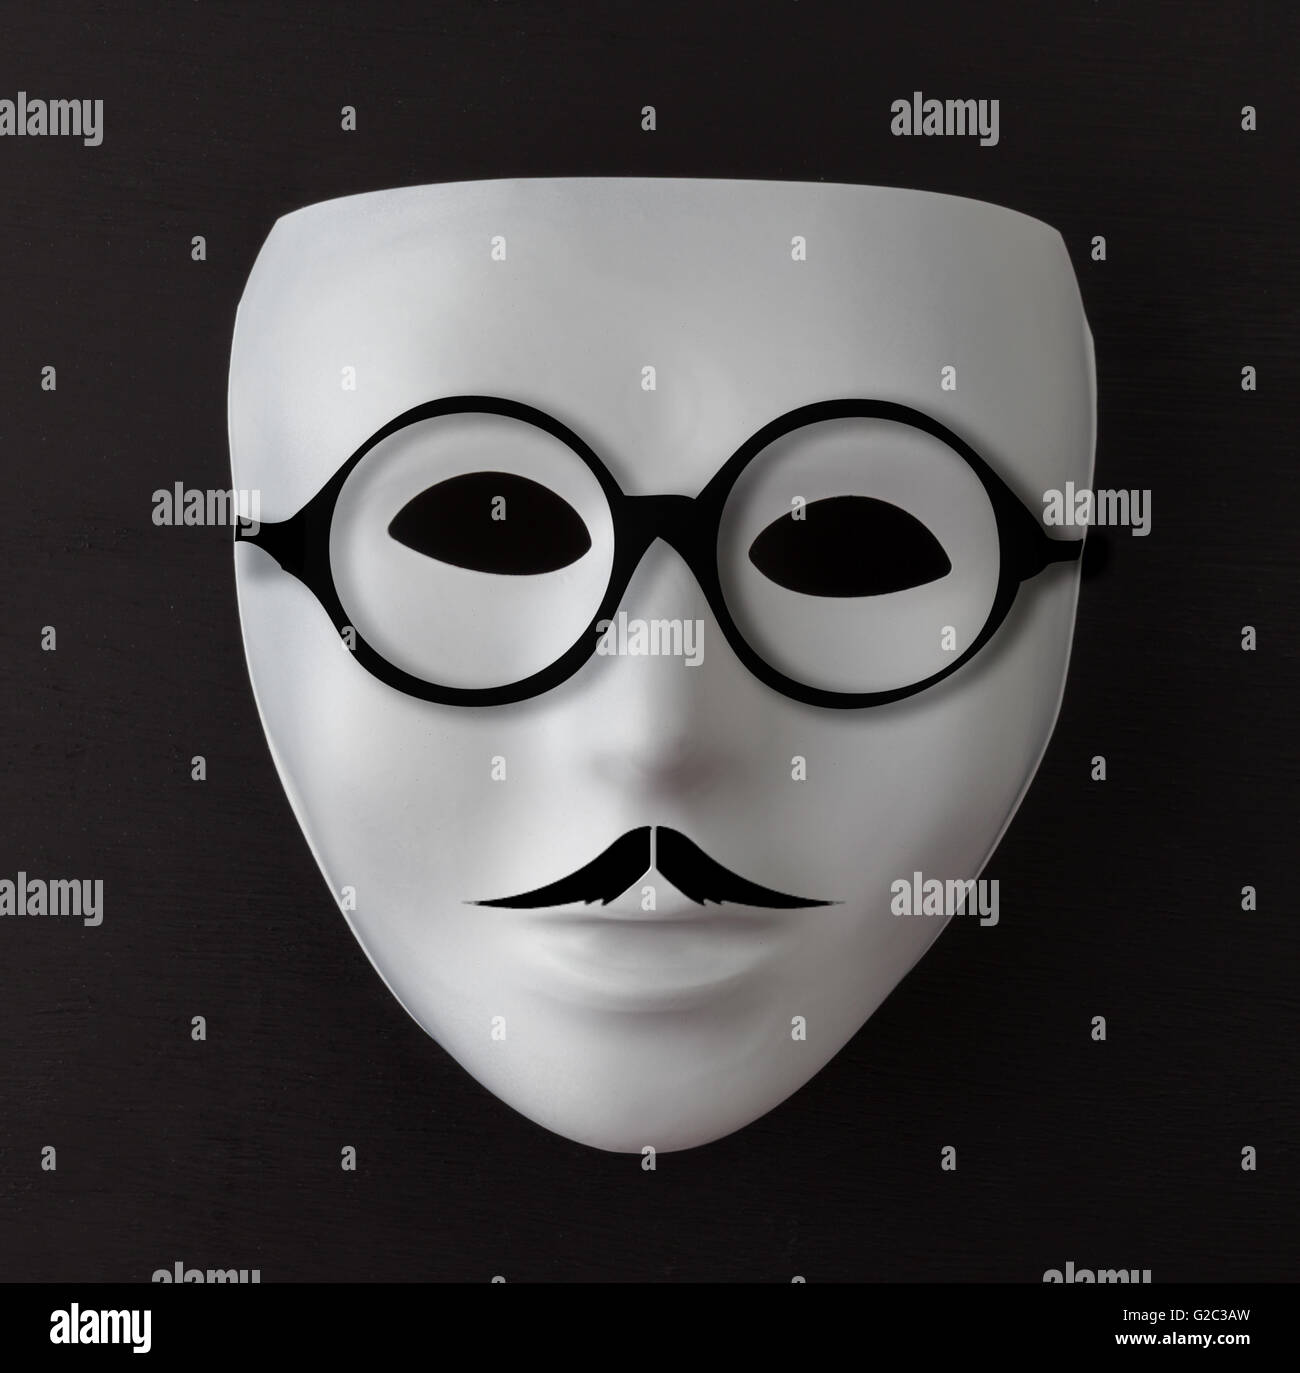 White Mask On Black Background Stock Photo - Download Image Now